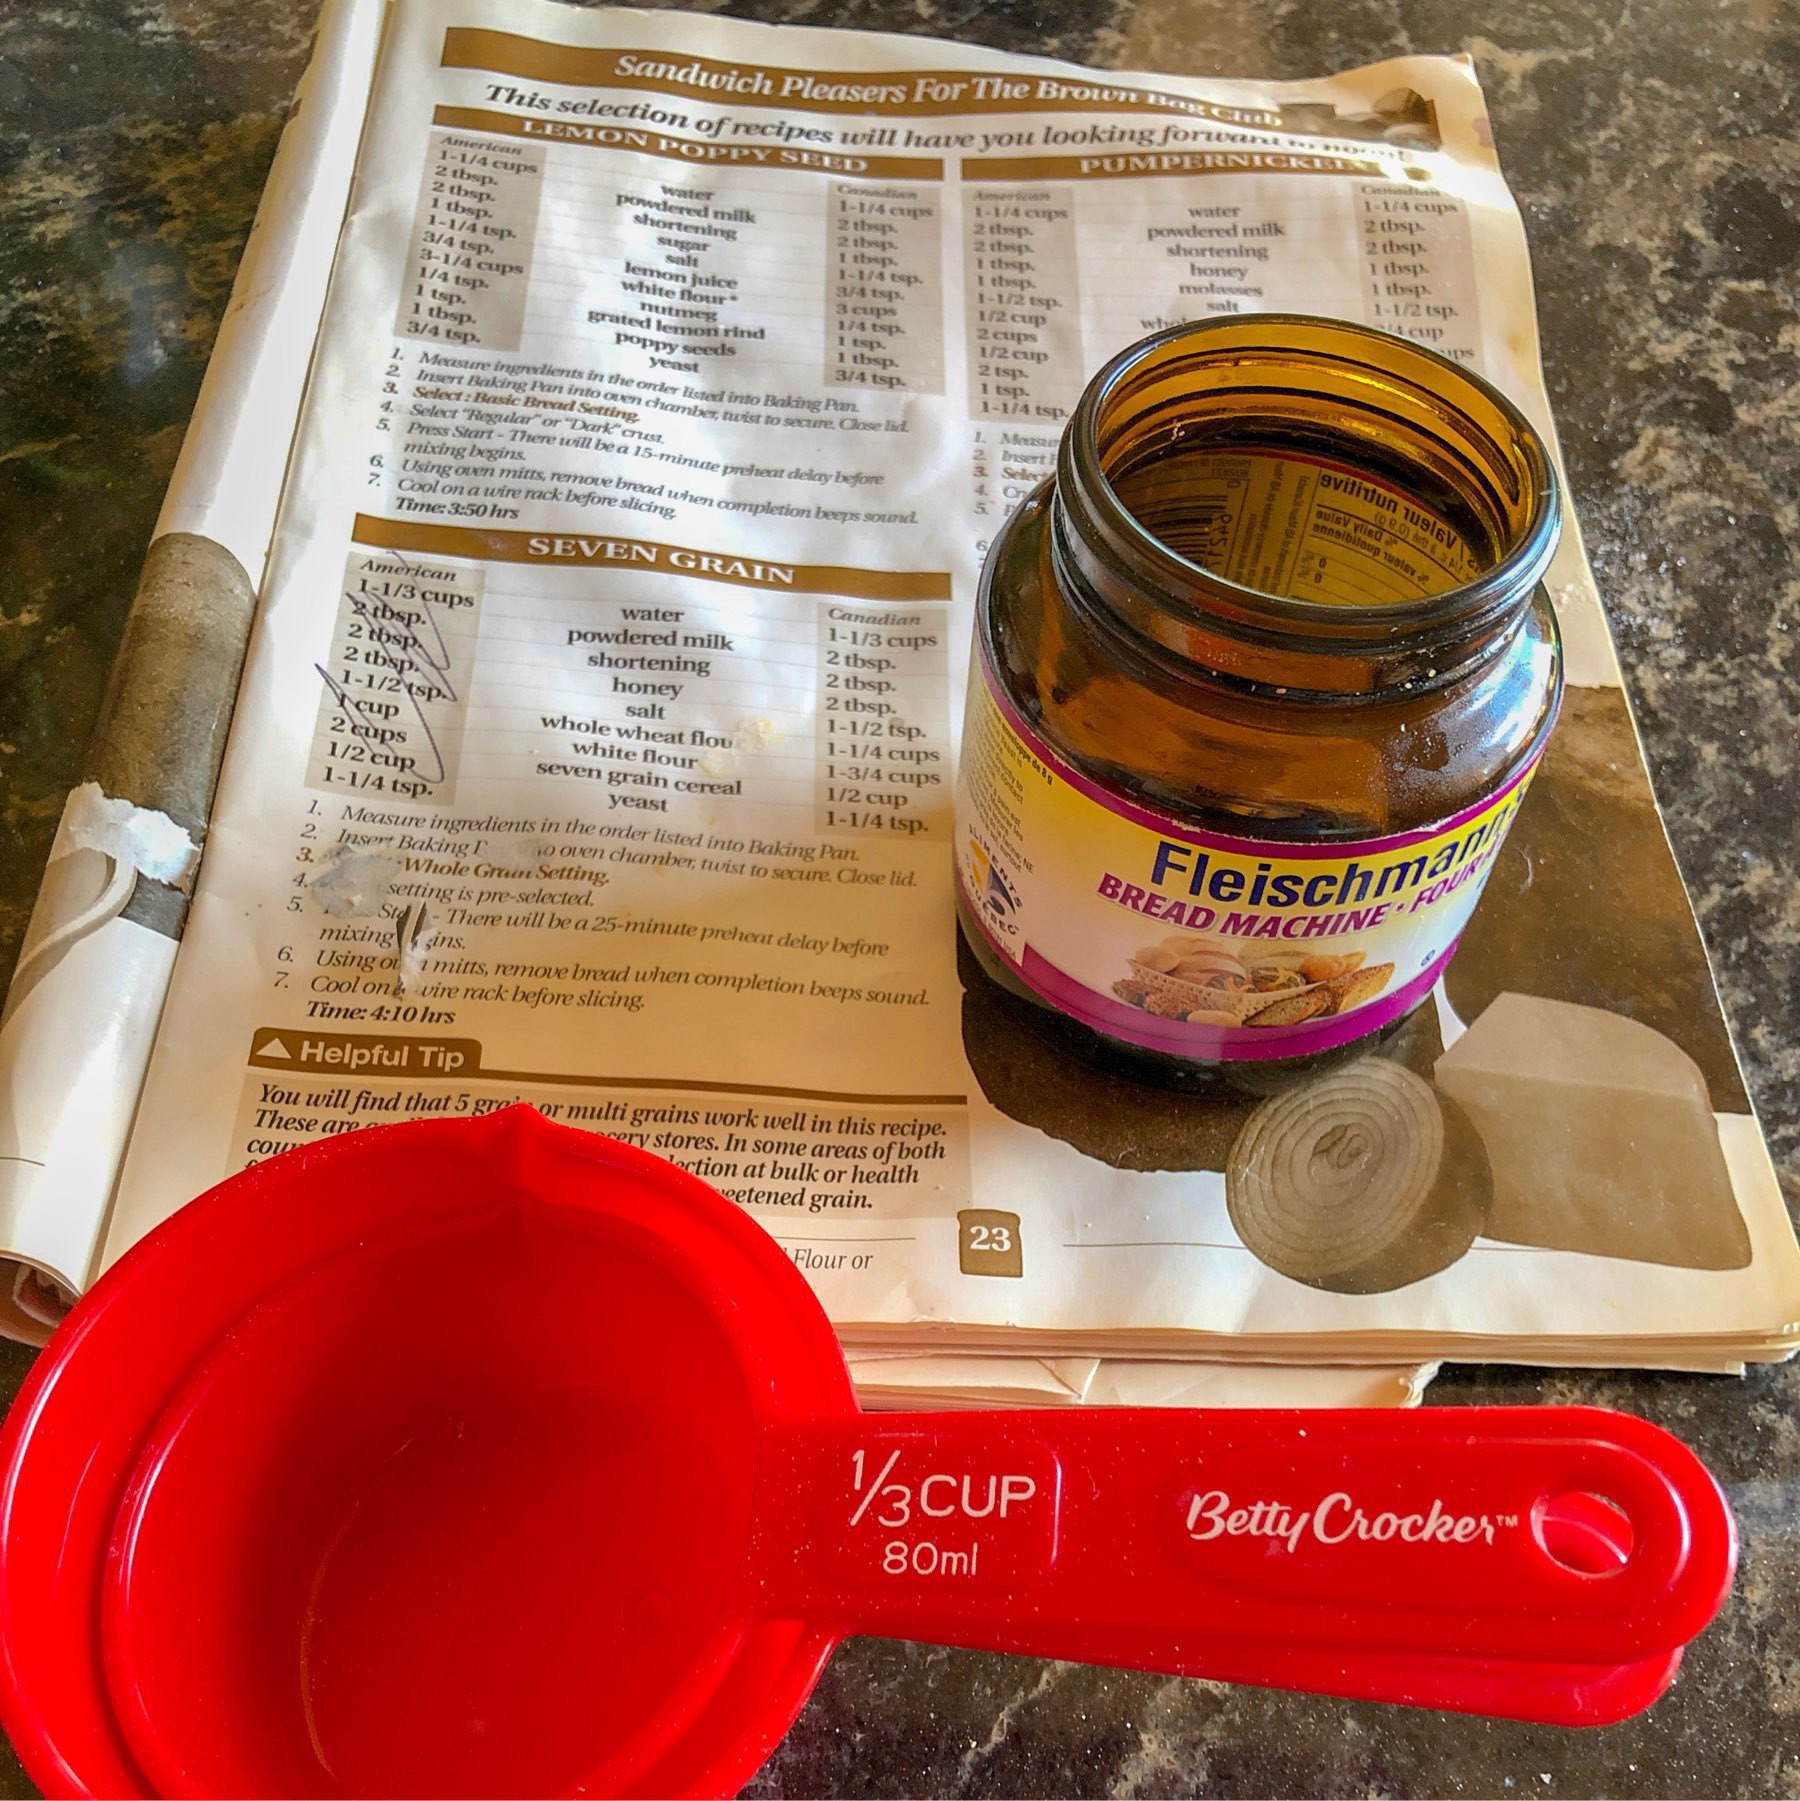 measuring cups, empty yeast jar and bread recipe book